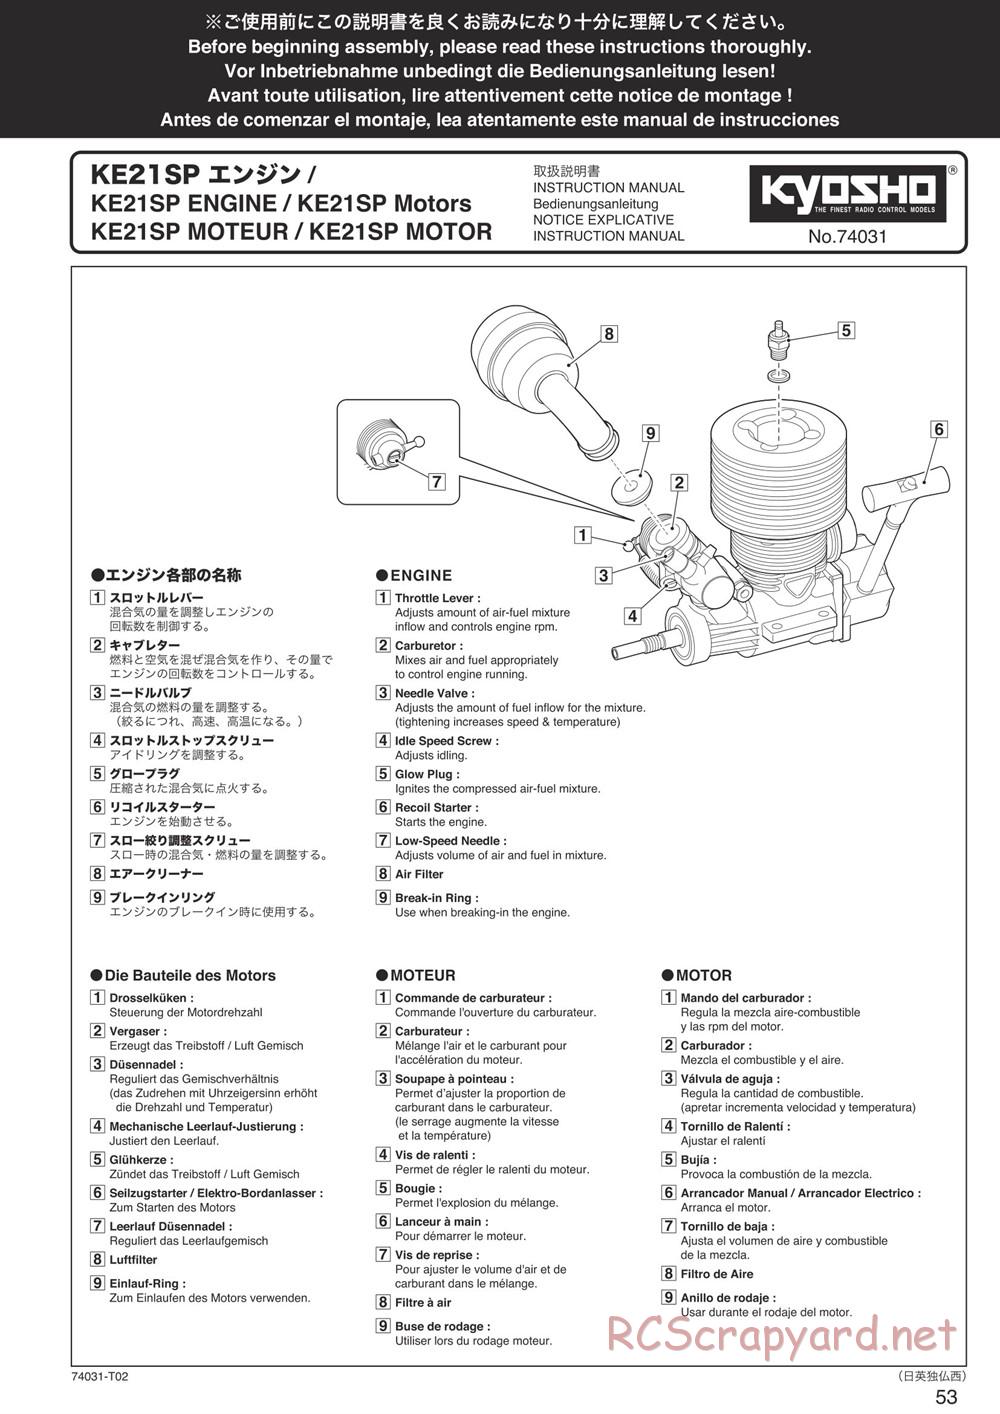 Kyosho - Inferno Neo 3.0 - Manual - Page 52